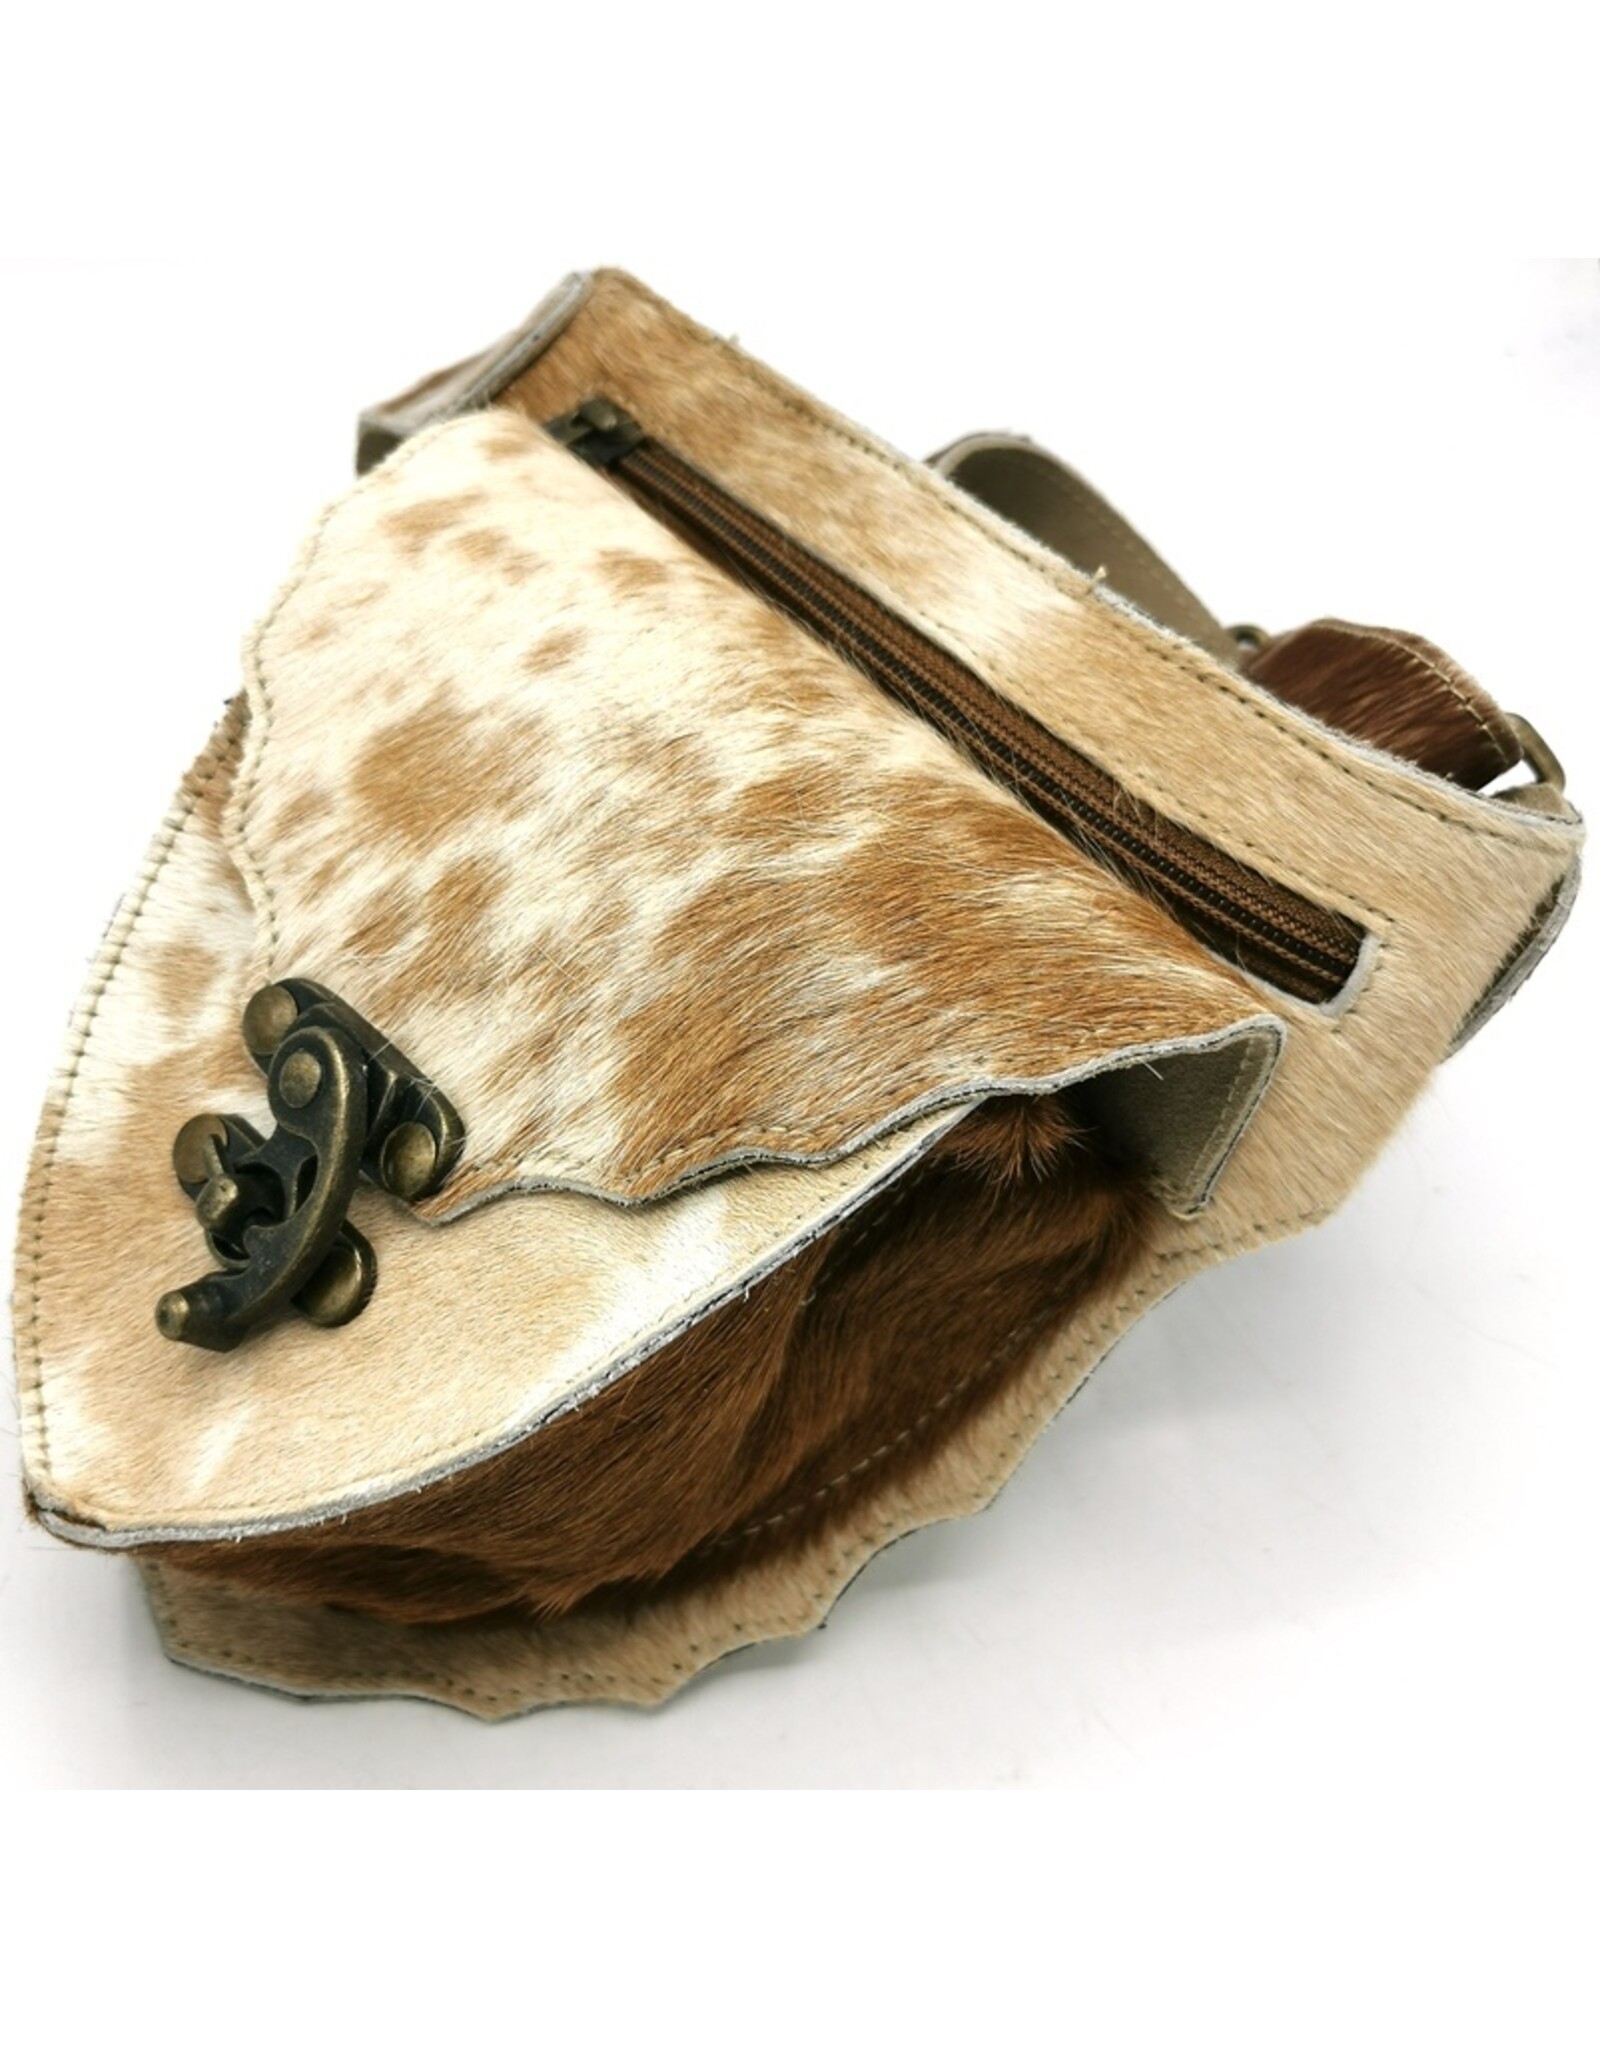 Trukado Leather Festival bags, waist bags and belt bags - Cowhide waist bag with vintage hook